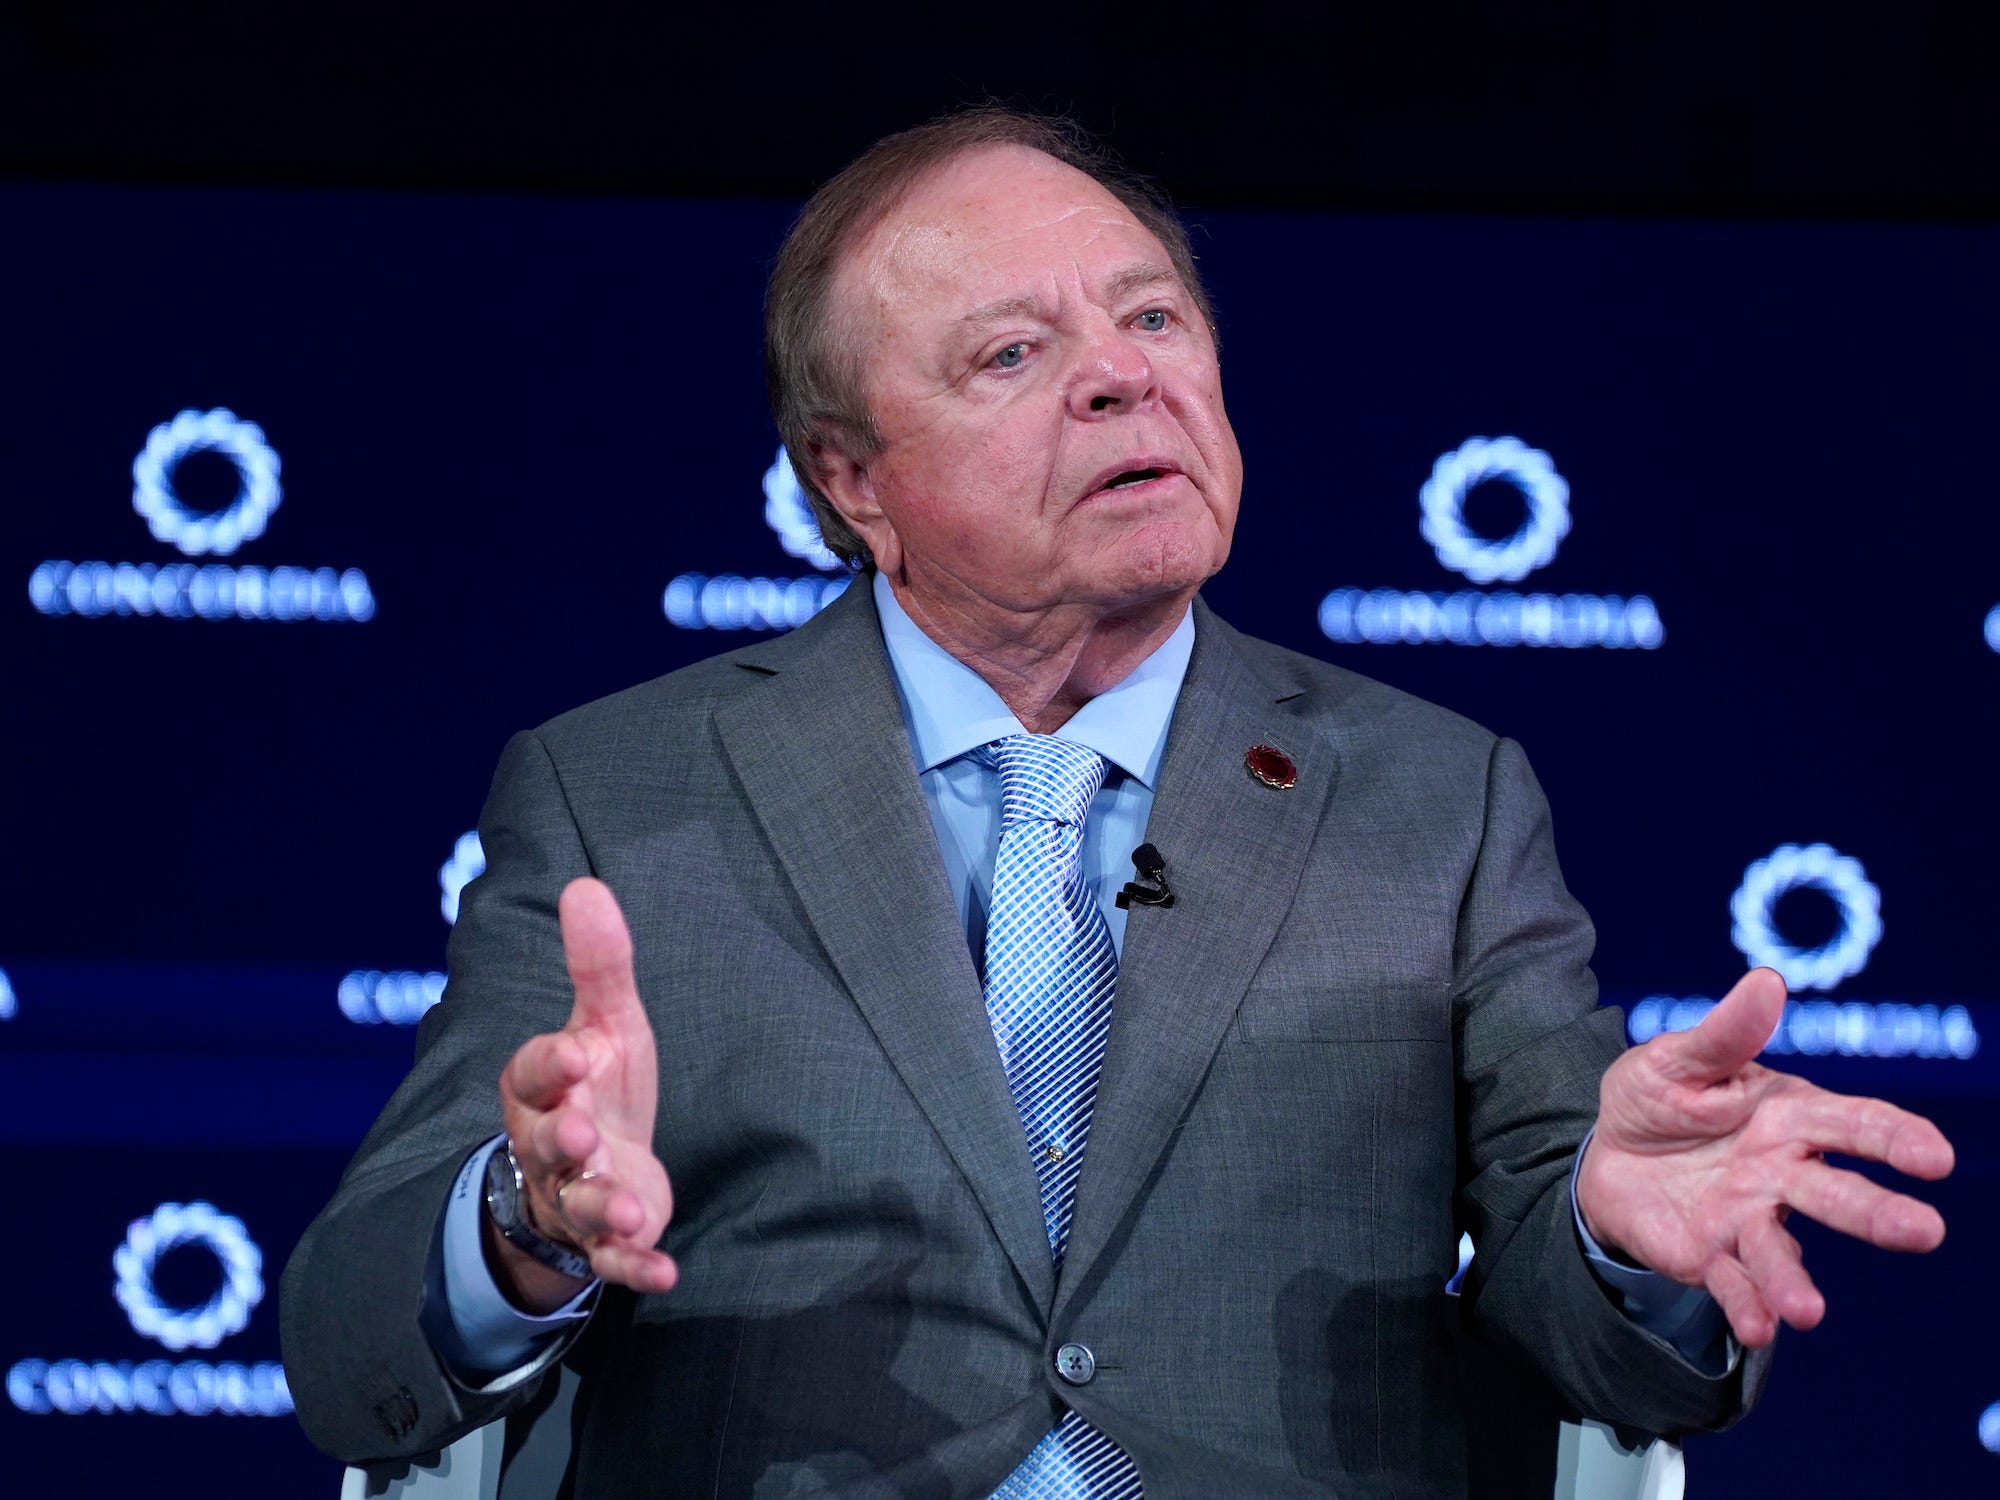 <p>Harold Hamm, an oil and gas magnate, has contributed $<span>614,000 to the Trump 47 Committee and $200,000 to the Trump-aligned MAGA Inc. super PAC.</span></p><p>"Republican, Democrat… I'm an oilocrat," he <a href="https://www.ft.com/content/93dffdd3-45f3-4628-b3b6-8204f1dd5777">told</a> the Financial Times in 2022.</p><p><span>Despite his current supporter for Trump — and his attendance of numerous fundraisers on the former president's behalf — Hamm </span>contributed thousands to both Florida Gov. Ron DeSantis and former Ambassador Nikki Haley last year.</p><p>He even <a href="https://www.businessinsider.com/trump-oil-gas-industry-political-donations-environment-drilling-2024-campaign-2023-11"><span>reportedly</span></a><span> told Trump in 2023 that he should end his presidential campaign, citing his "chaos."</span></p><p>"I know he wasn't happy," Hamm <a href="https://www.ft.com/content/c93982ee-4387-4c95-9bb1-a7cd3b89bbe7">told the Financial Times</a> of the call. "That's all I can do. How seriously he takes that recommendation, I don't know."</p>